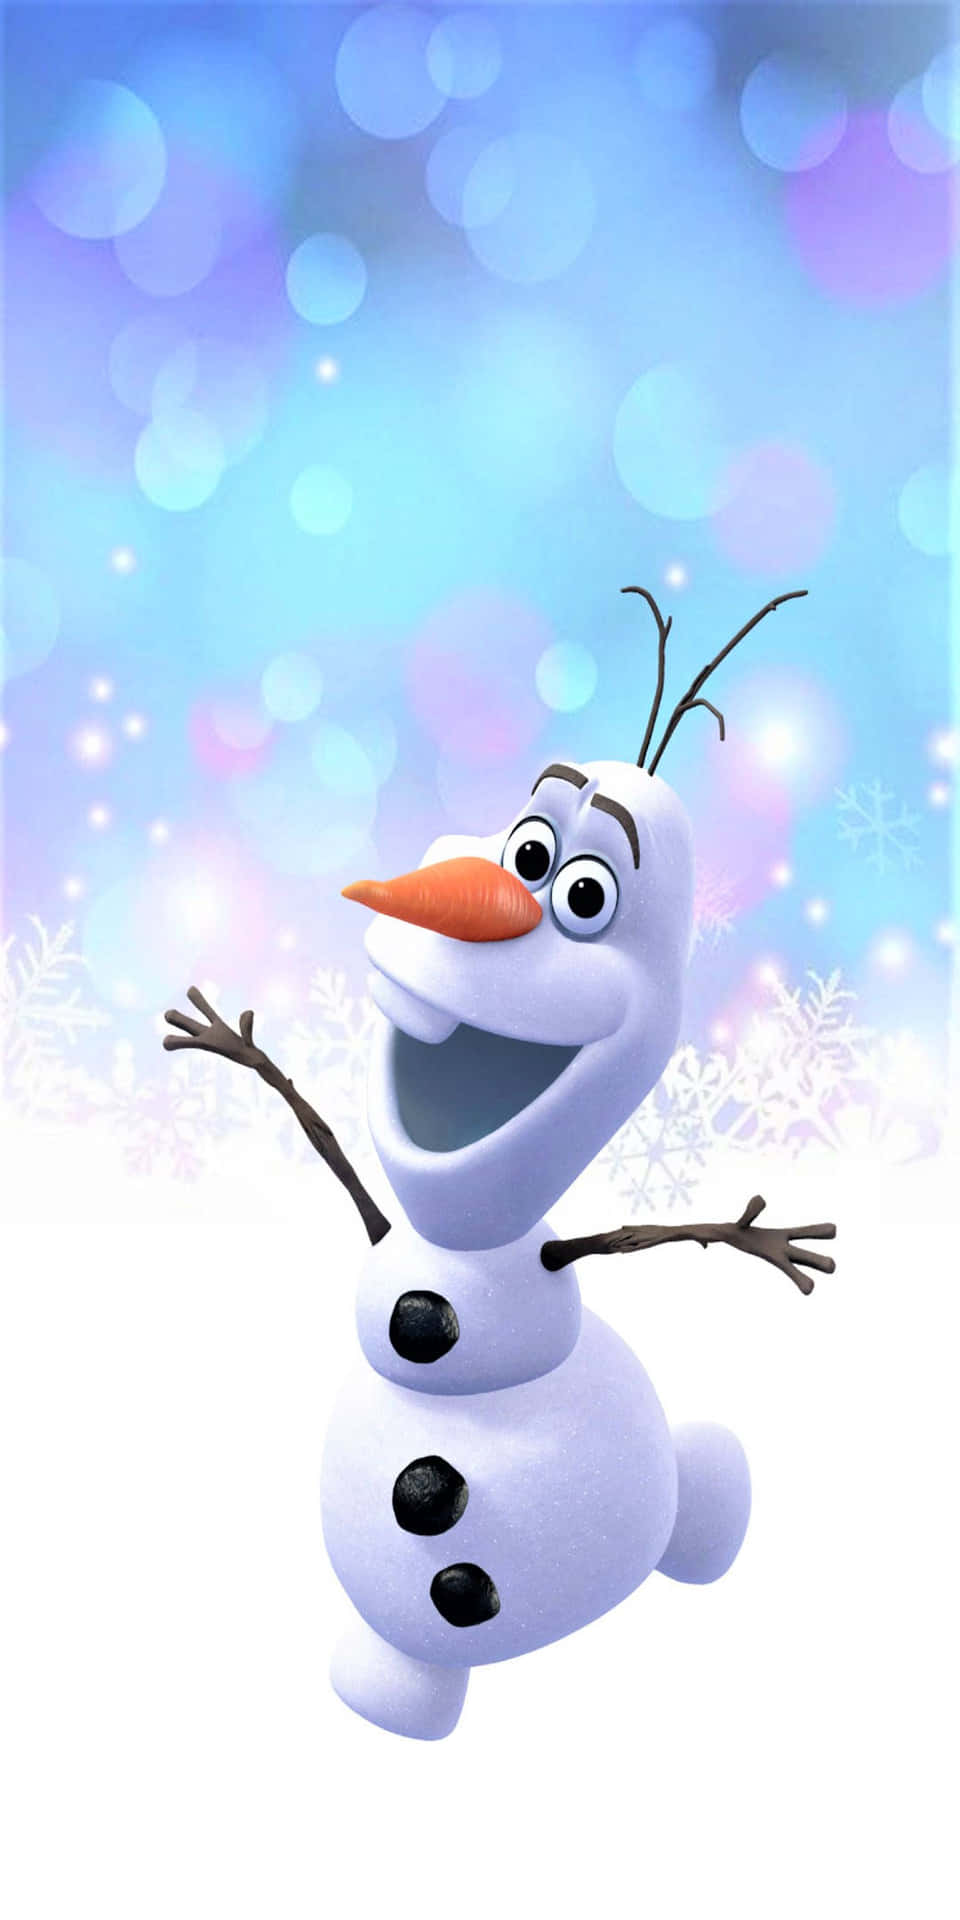 Top More Than Cute Olaf Wallpaper Super Hot In Cdgdbentre